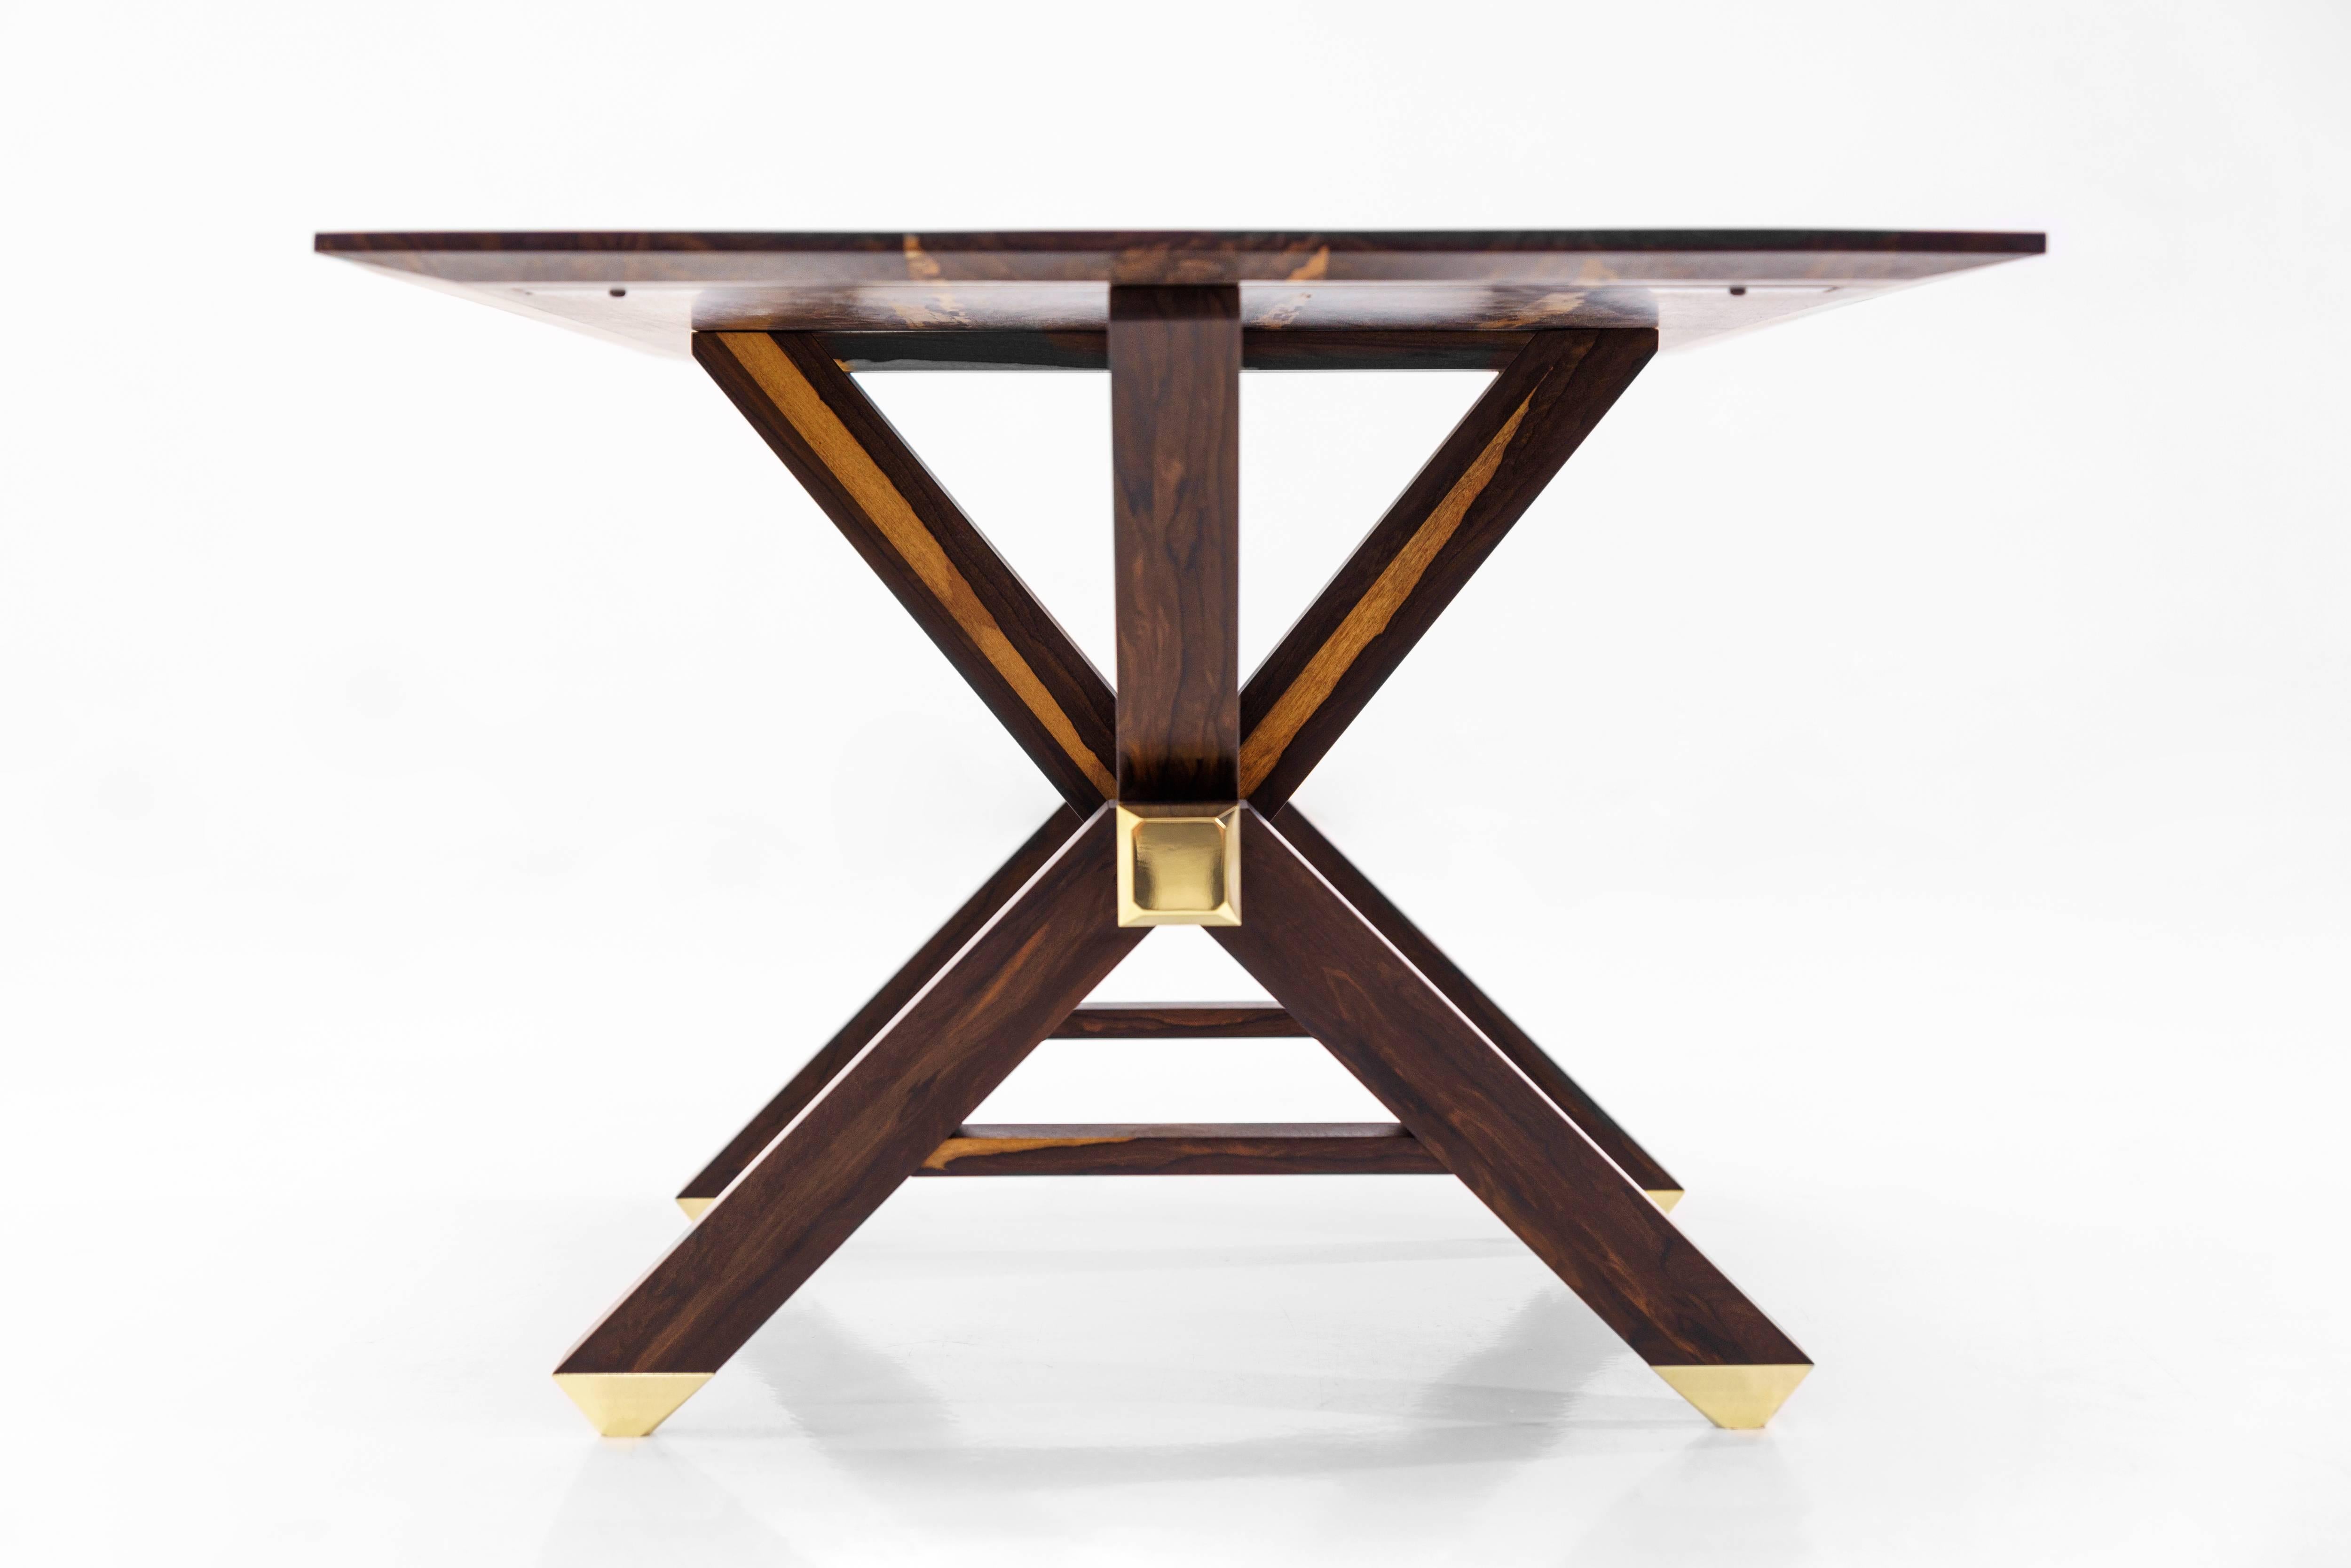 The Calypso table is completely handmade and was designed by Martin Goebel in 2017. Referencing the timber framing of wooden boatbuilding, the substructure yields uninhibited seating. Angular geometry is accented with billet machined brass shoes and